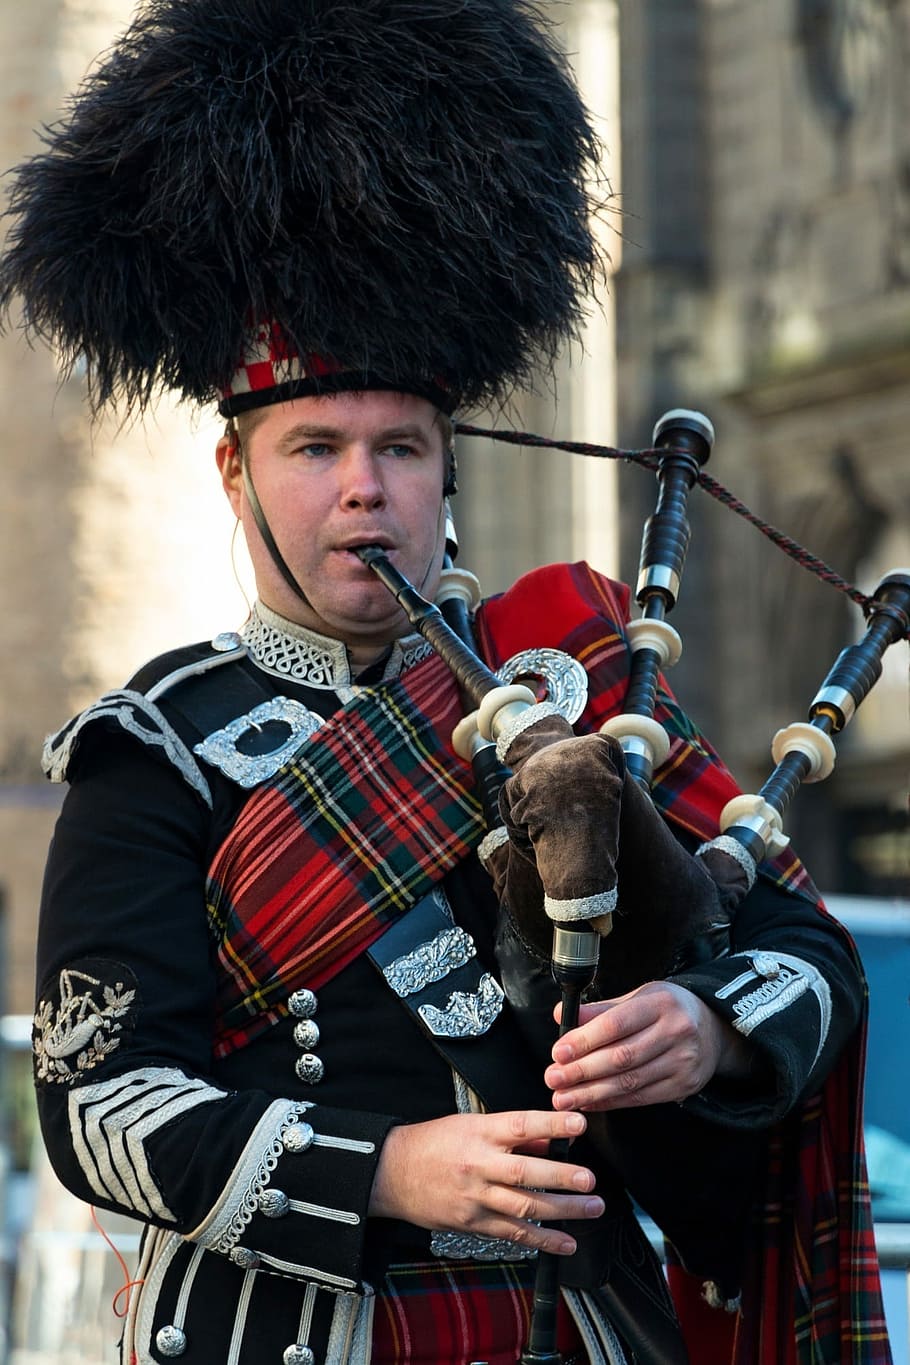 Bagpipe, Scotland, Edinburgh, playing the bagpipes, bagpiper, royal mile, music, portrait, musician, musical instrument